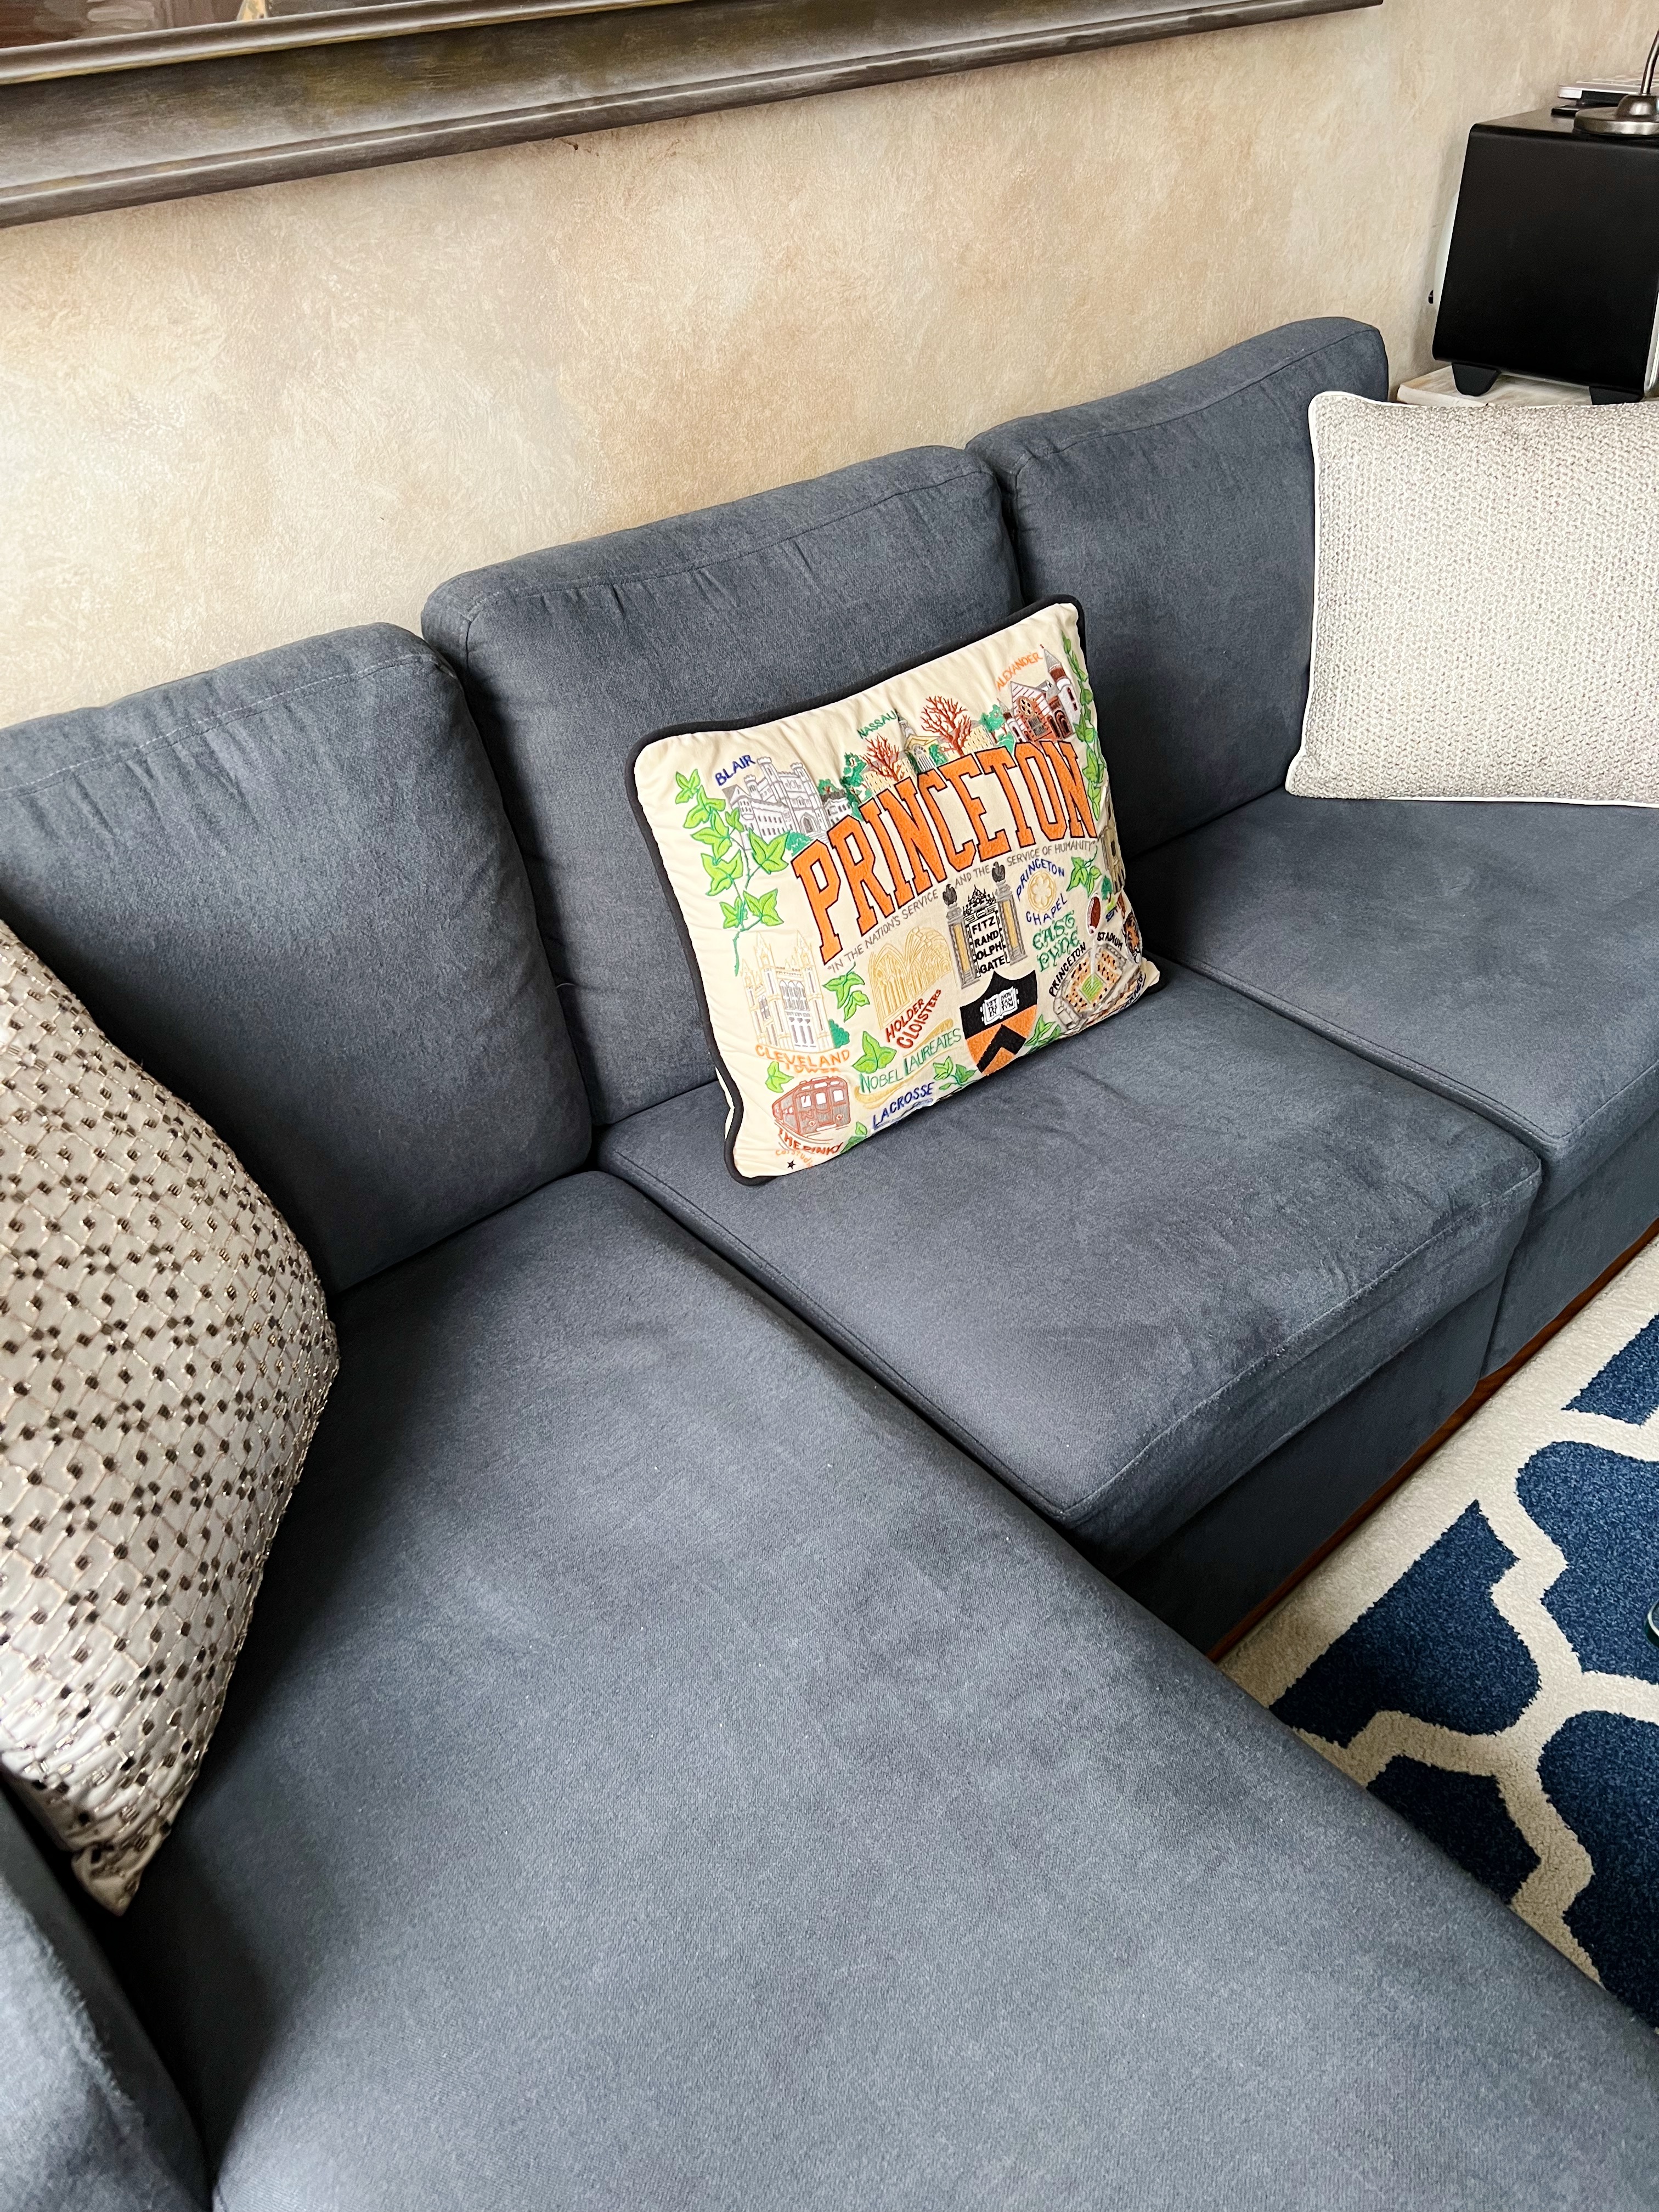 grey couch with three pillows, one with a Princeton design